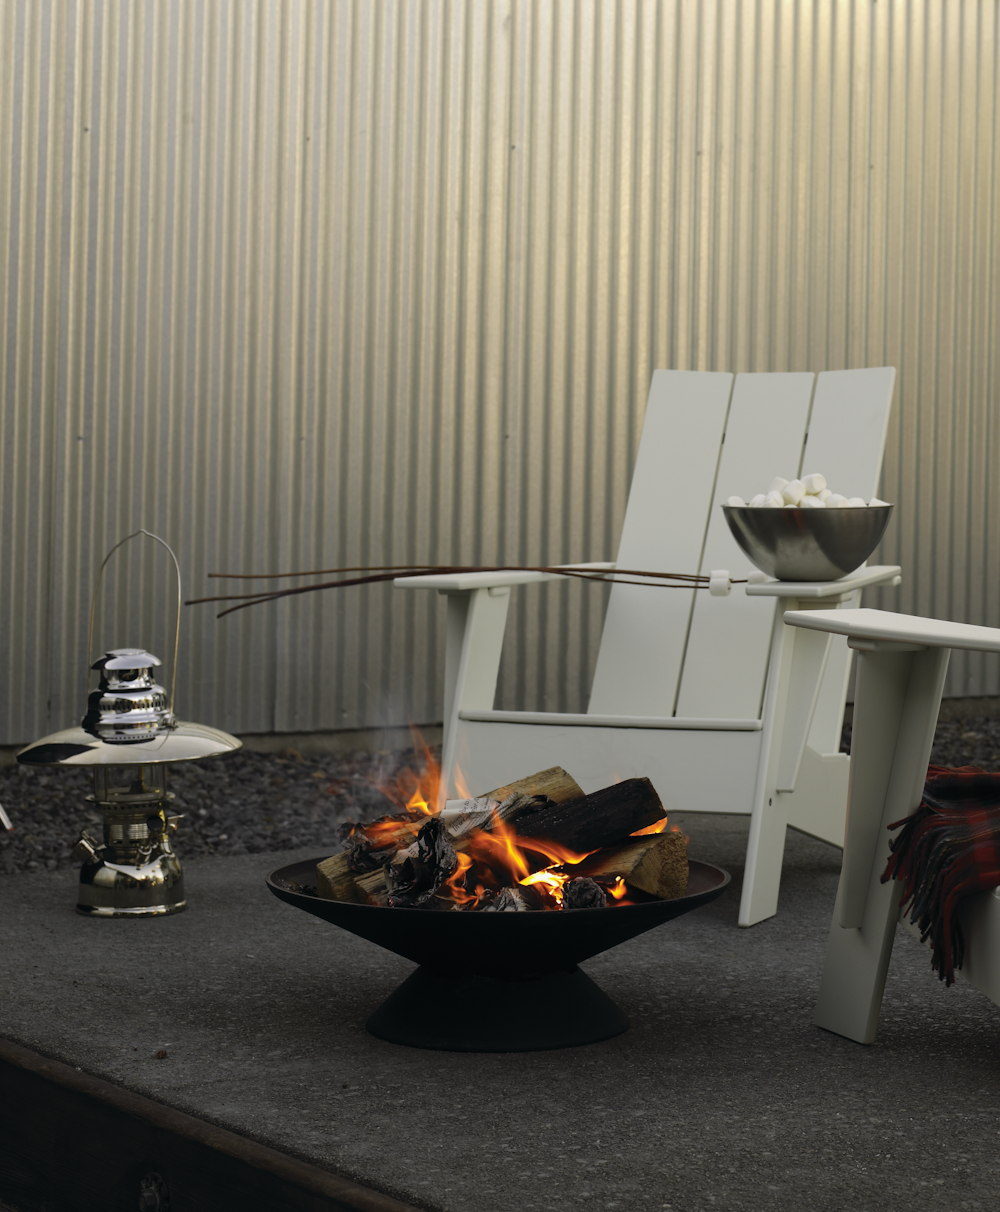 Cast-Iron Fire Bowls with Grates in an outdoor setting